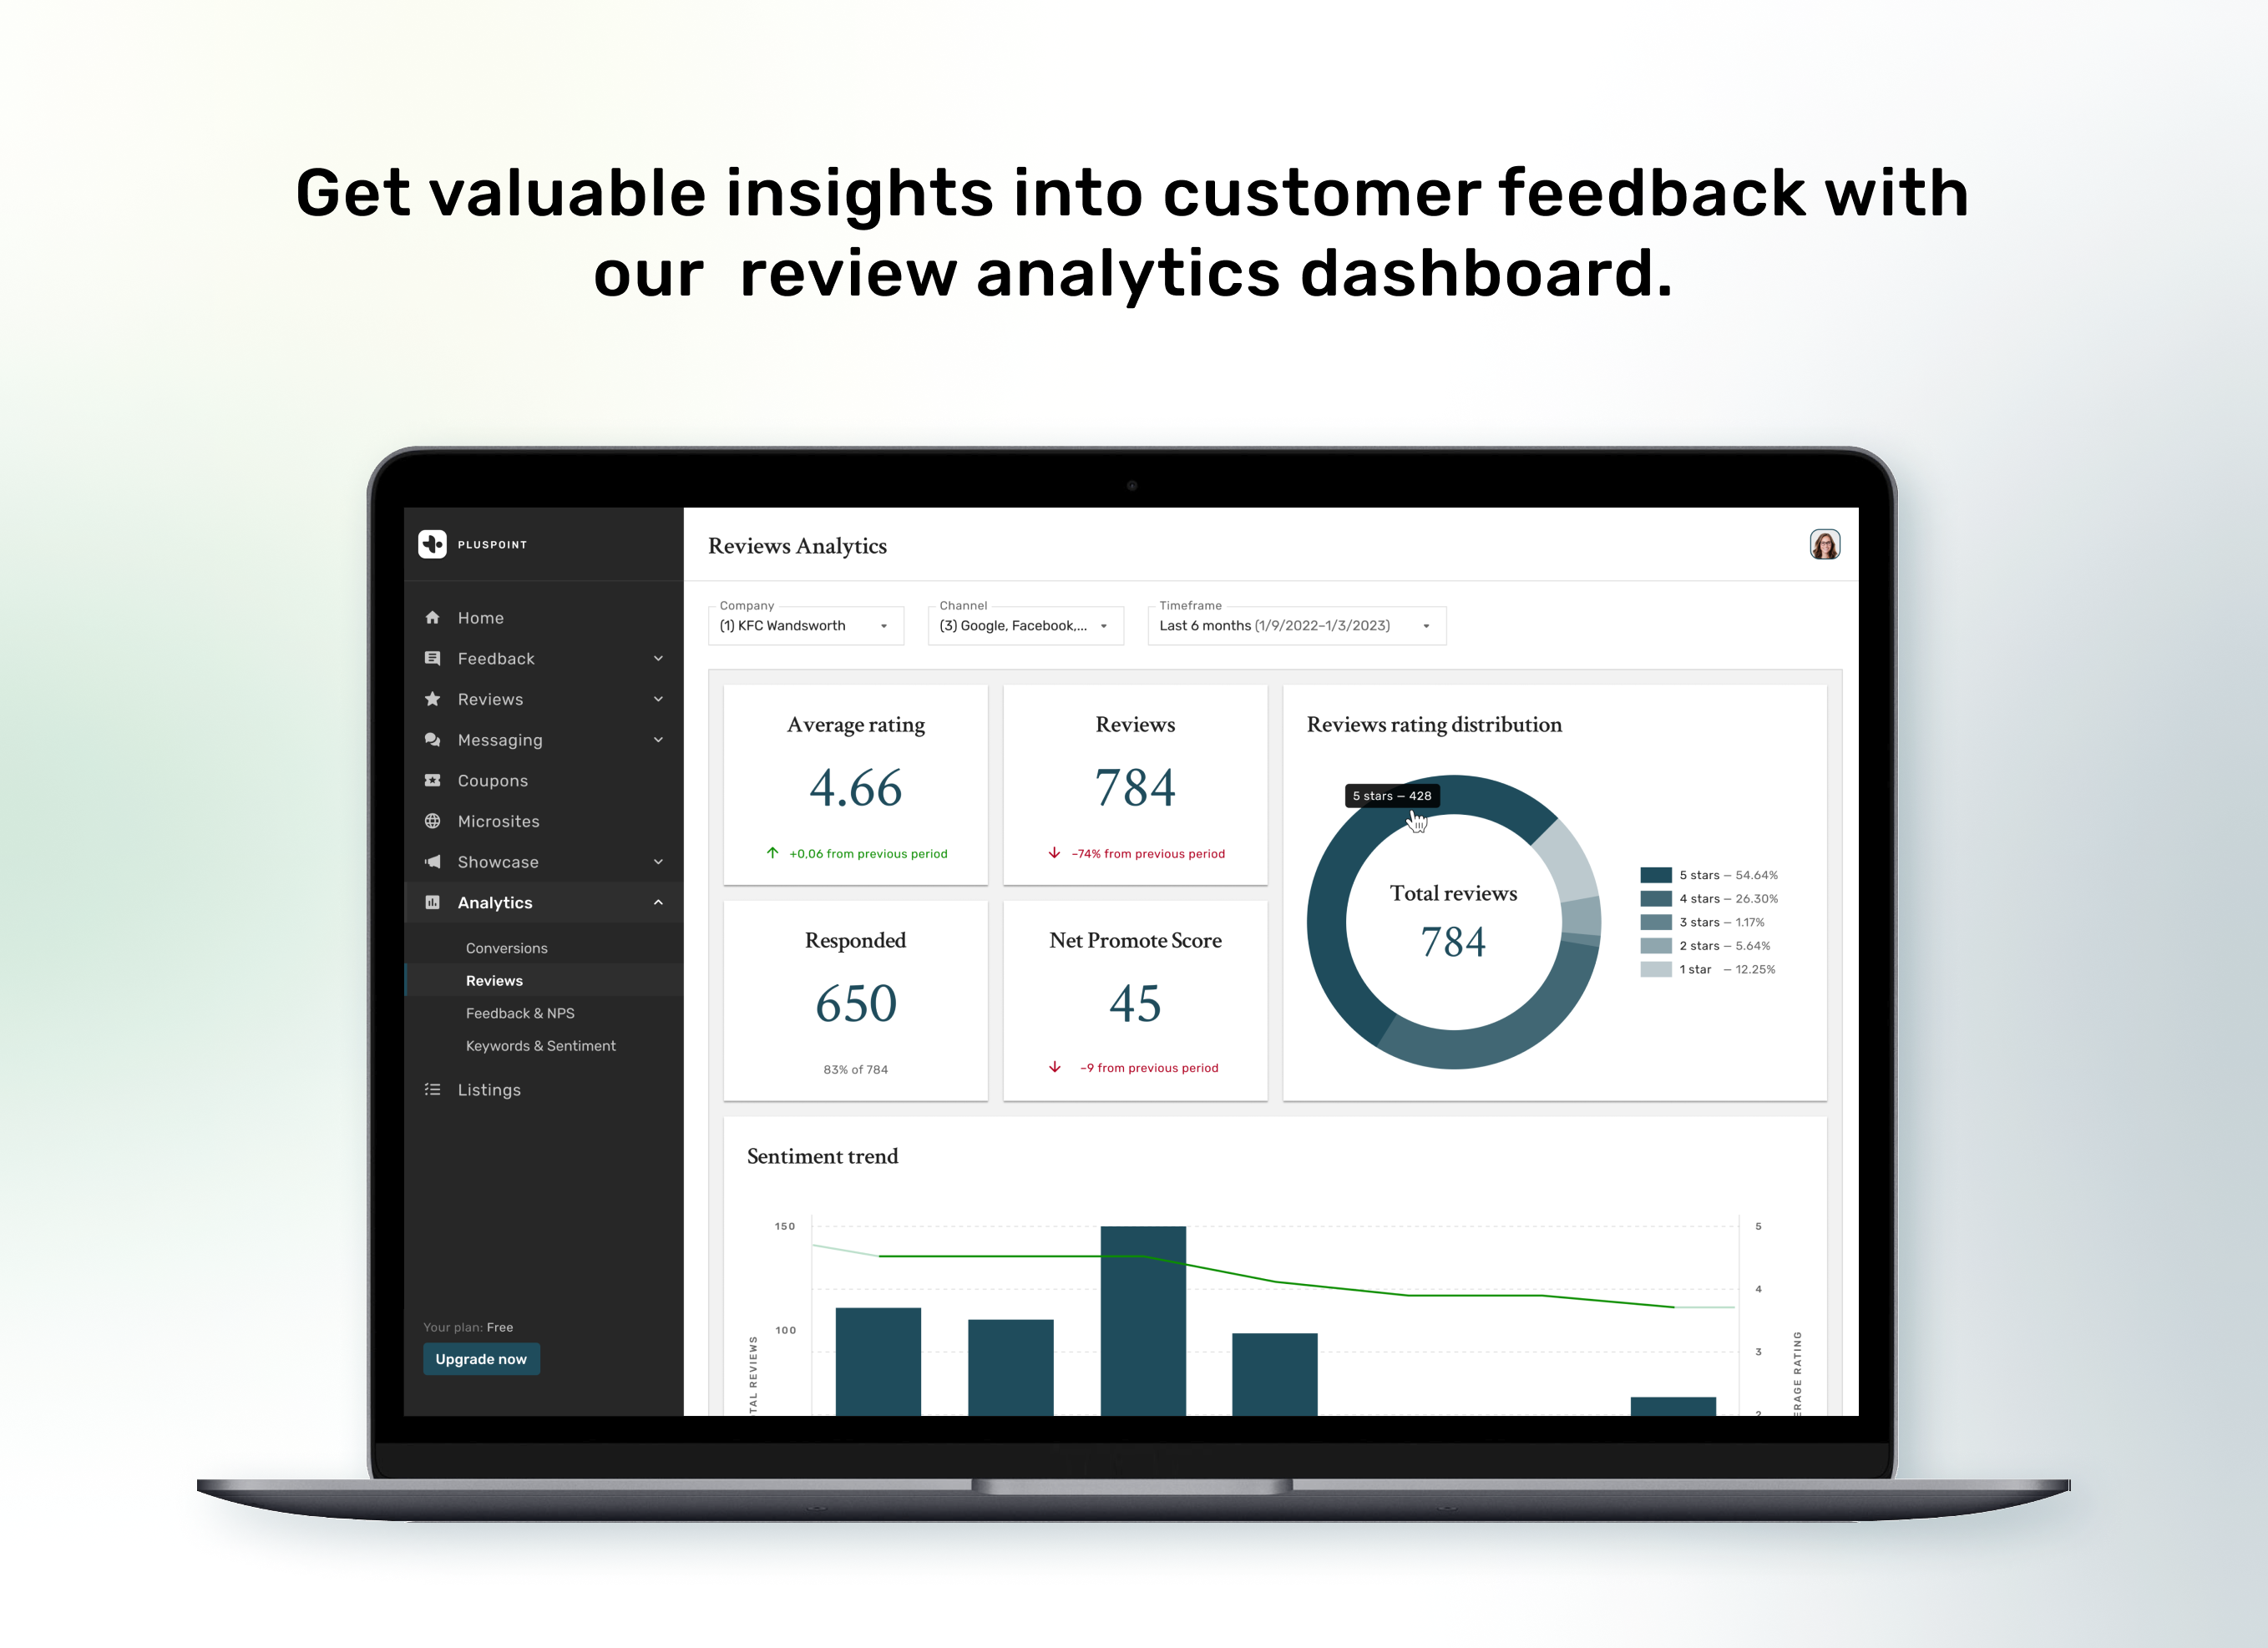 By using features like NPS rating distribution, response rating distribution and sentiment trends, businesses can monitor their progress and pinpoint areas for improvement.